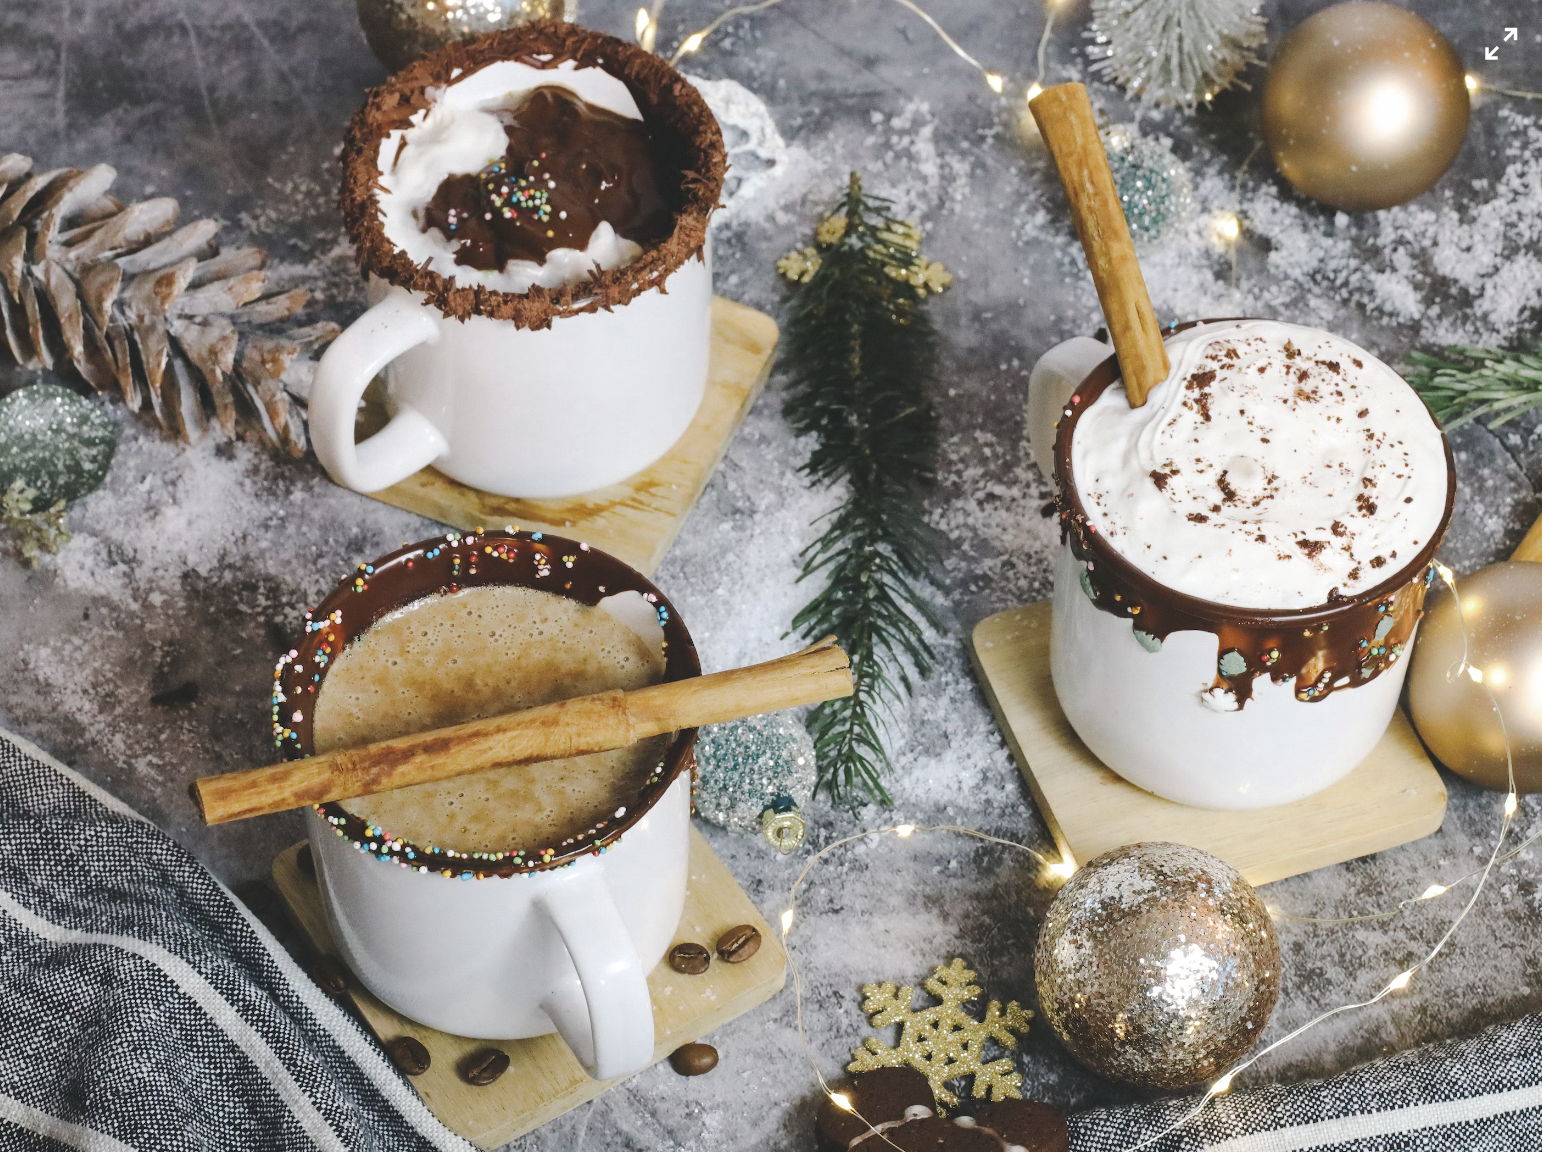 Seasonal drink flavors range from peppermint to winter cookie-infused delights. Photo used with permission from Ruth Georgiev via Unsplash.